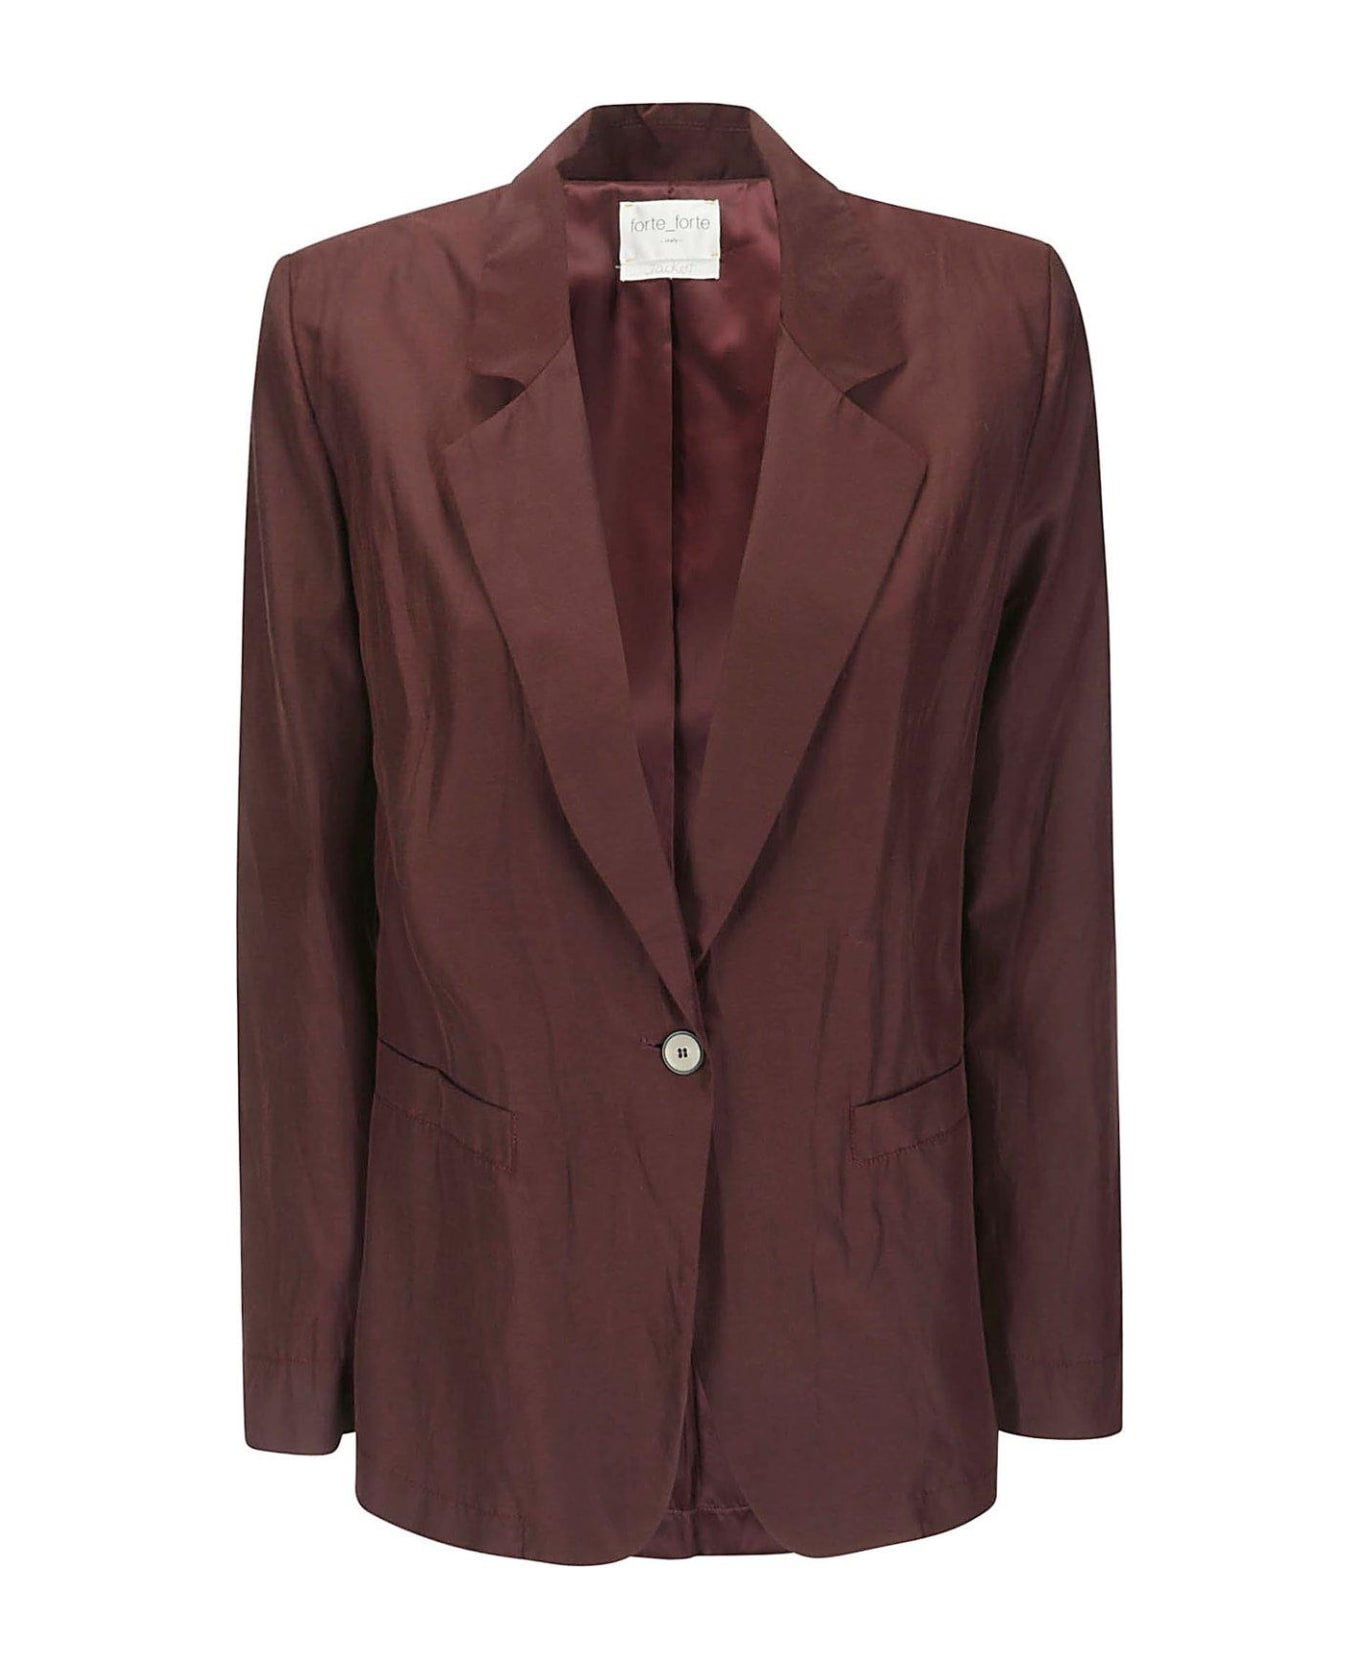 Forte_Forte Chic Boxy Jacket - Cacao ブレザー